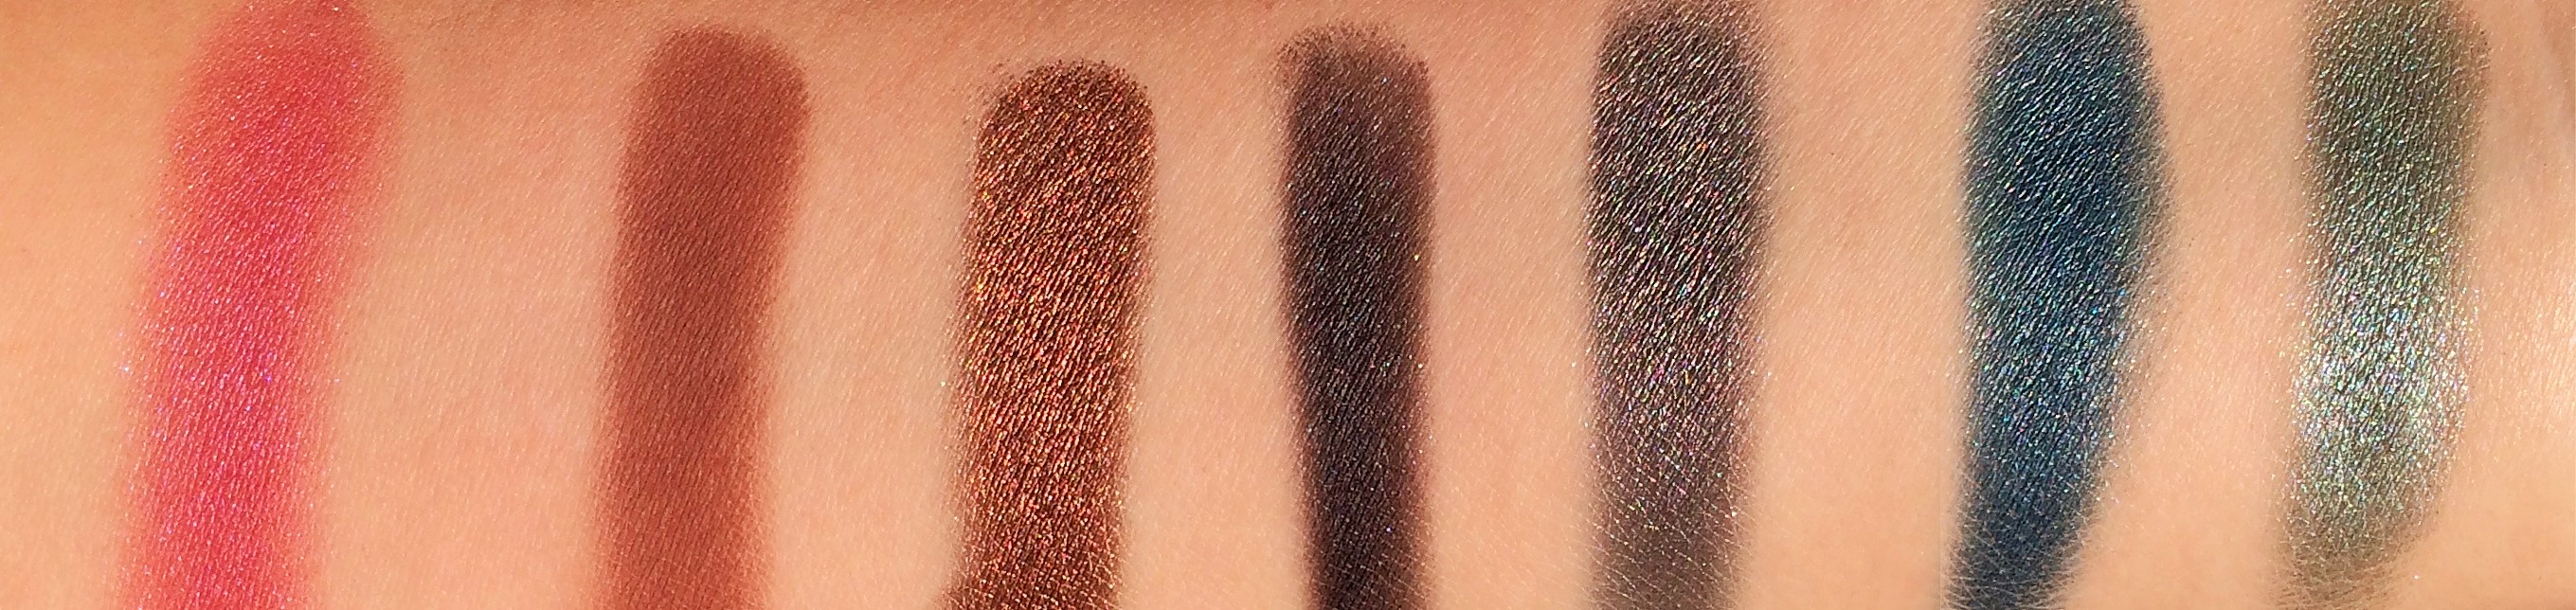 Review Urban Decay Born To Run Palette (15)